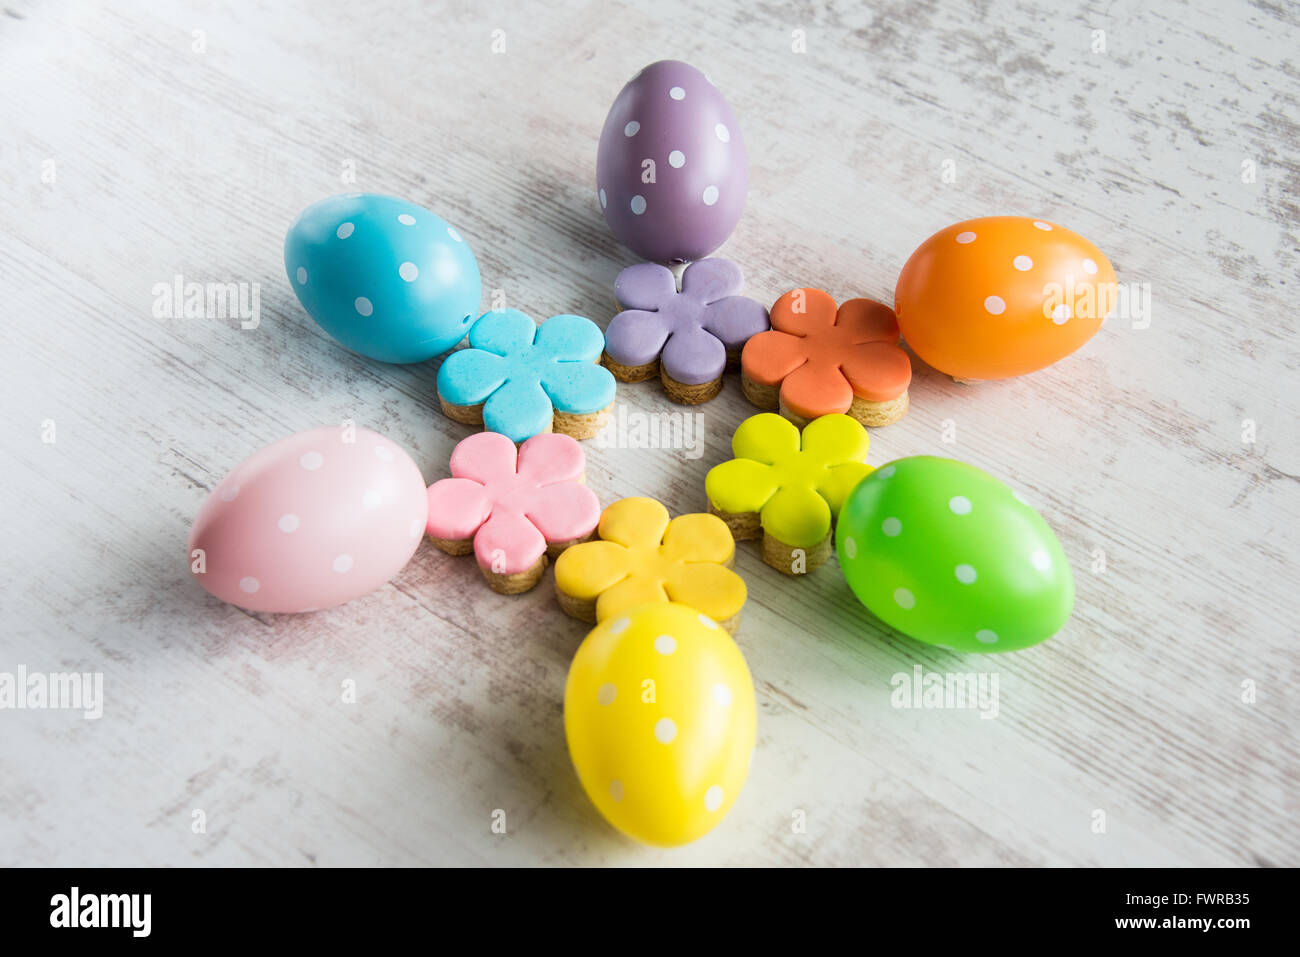 Colorful easter eggs with flower cut fondant covered homemade cookies Stock Photo